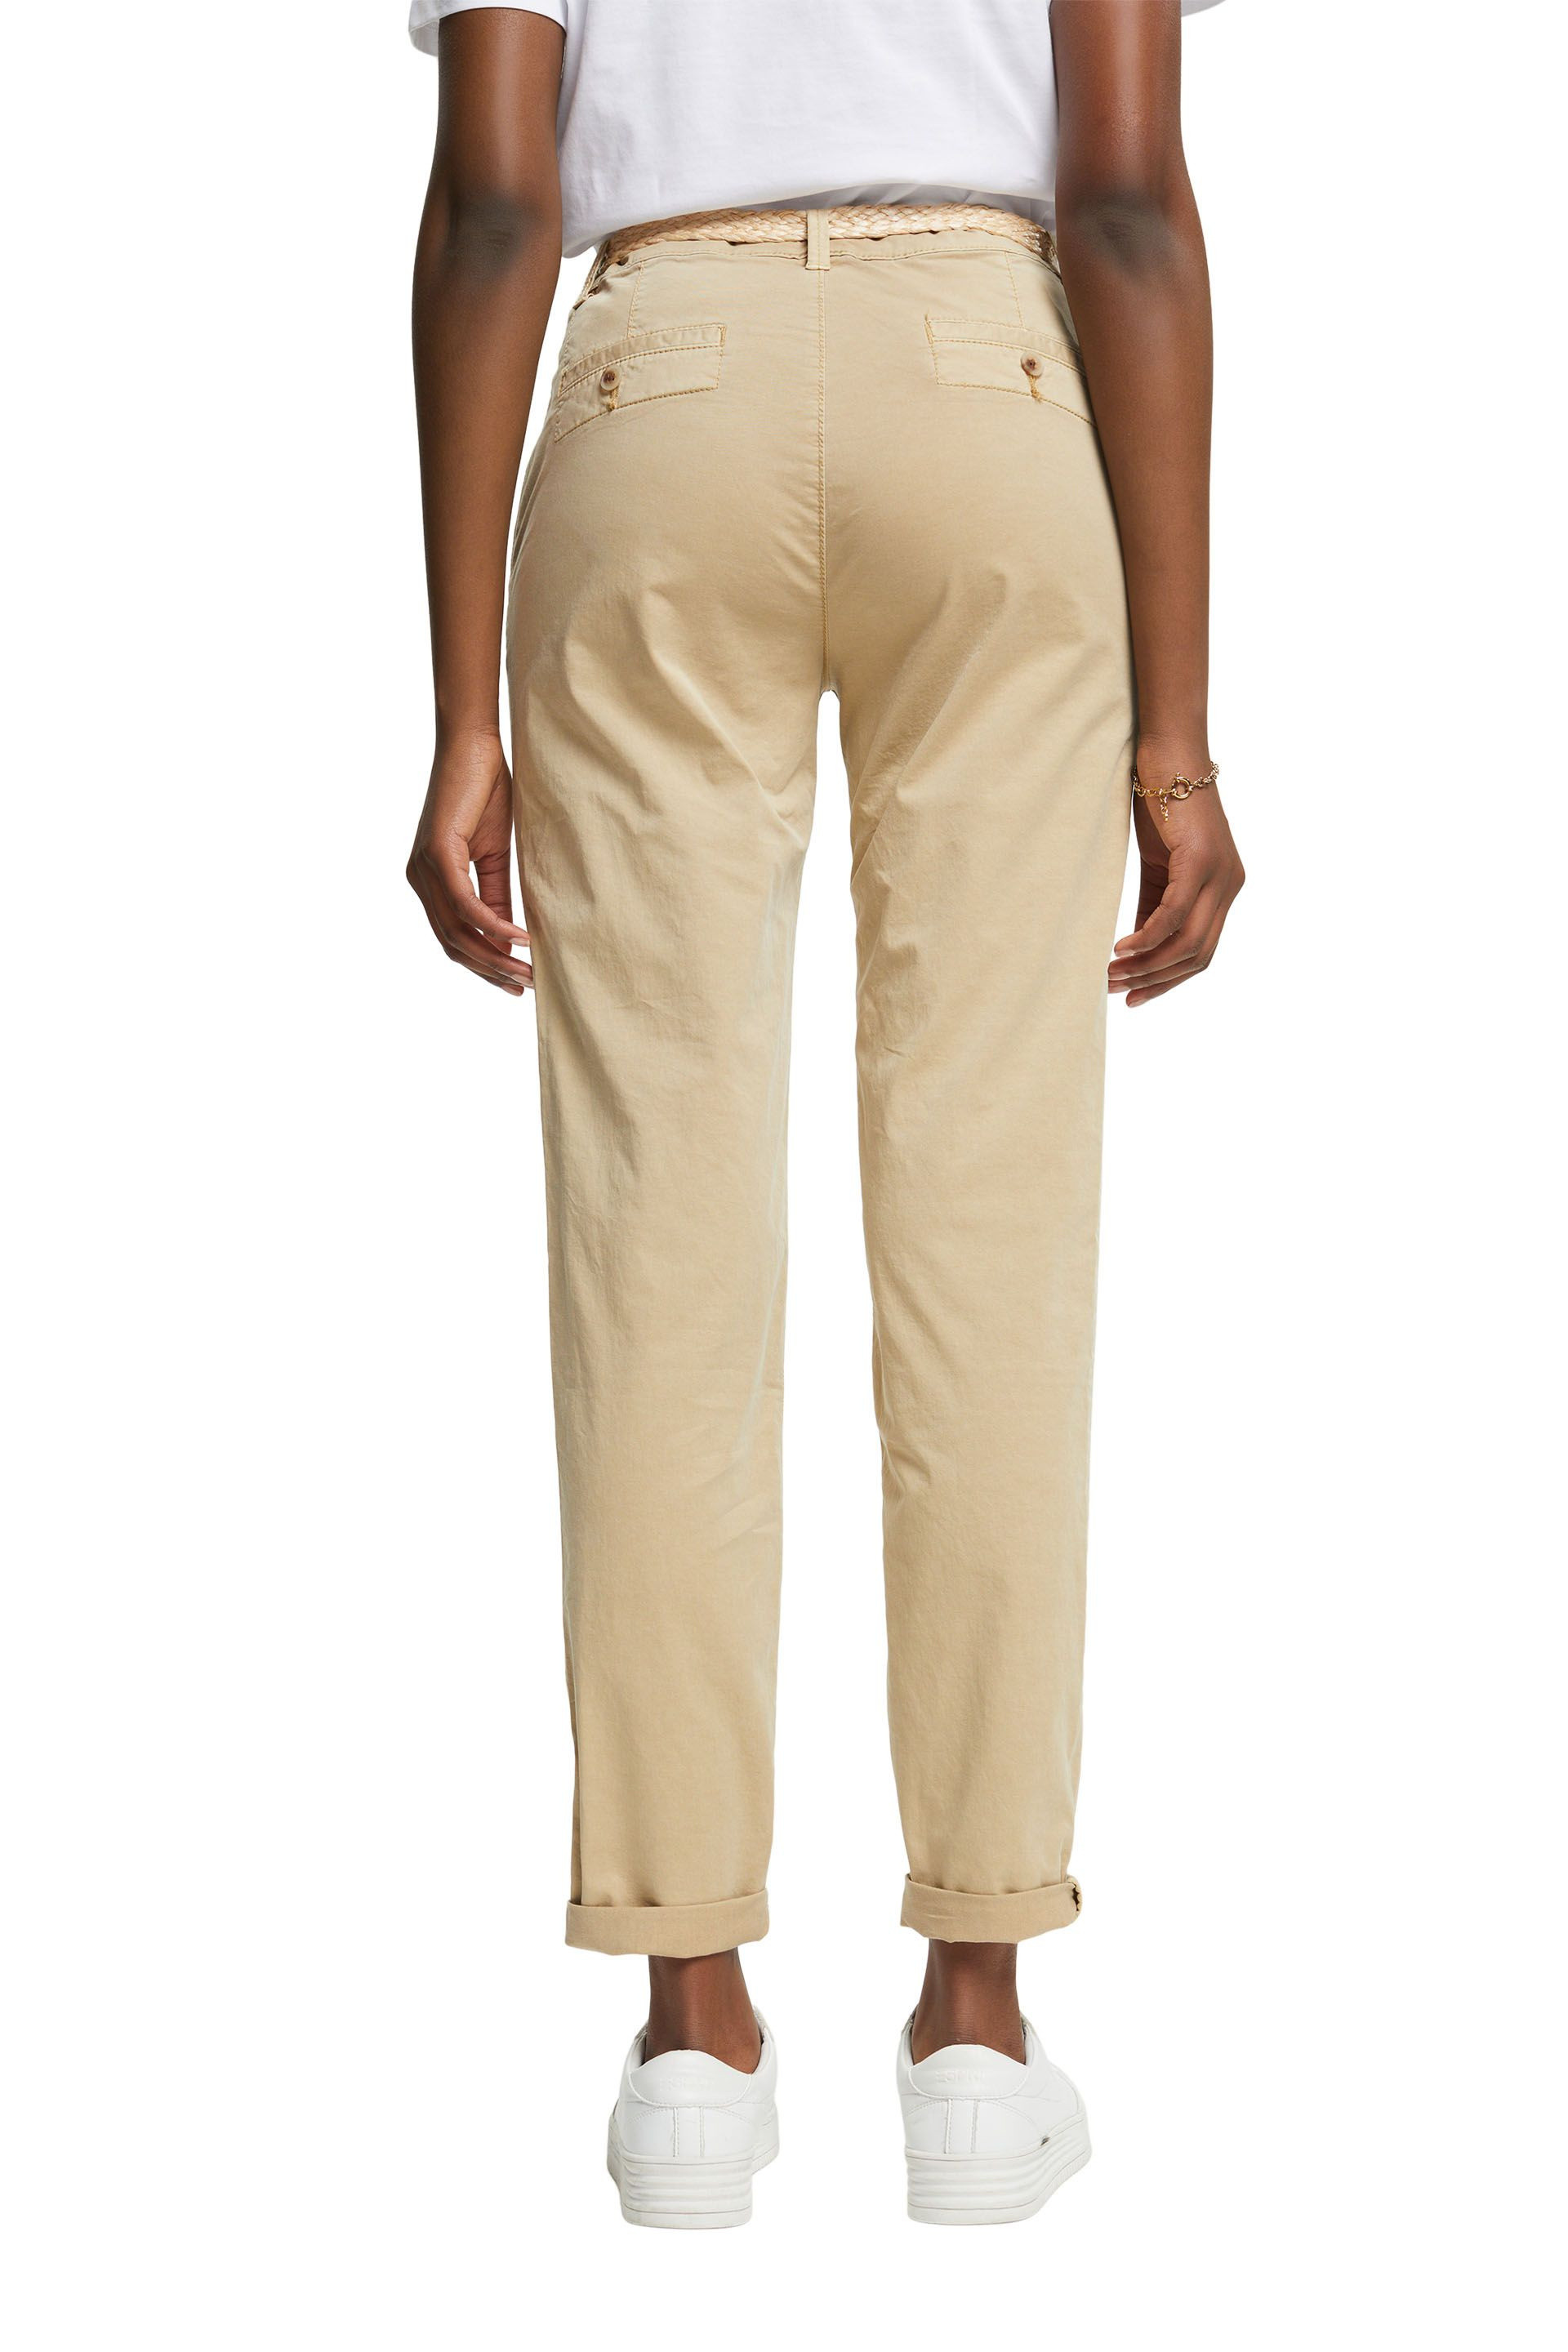 Esprit - Cropped chinos with belt, Sand, large image number 2